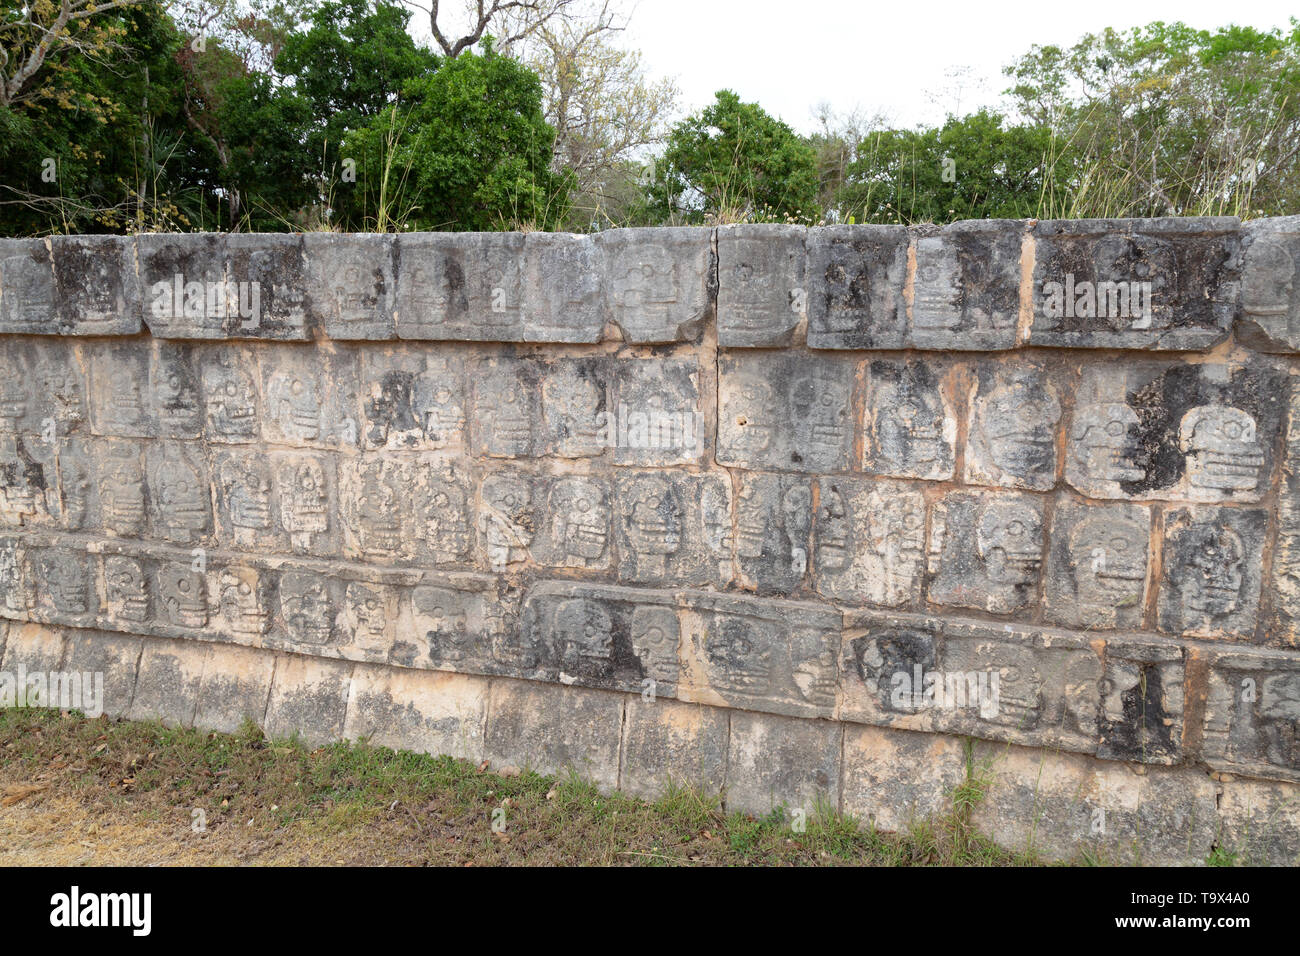 The Tzompantli, or Skull Platform, where the heads of Mayan victims, usually defeated enemies, were displayed; Chichen Itza, Mexico Latin America Stock Photo